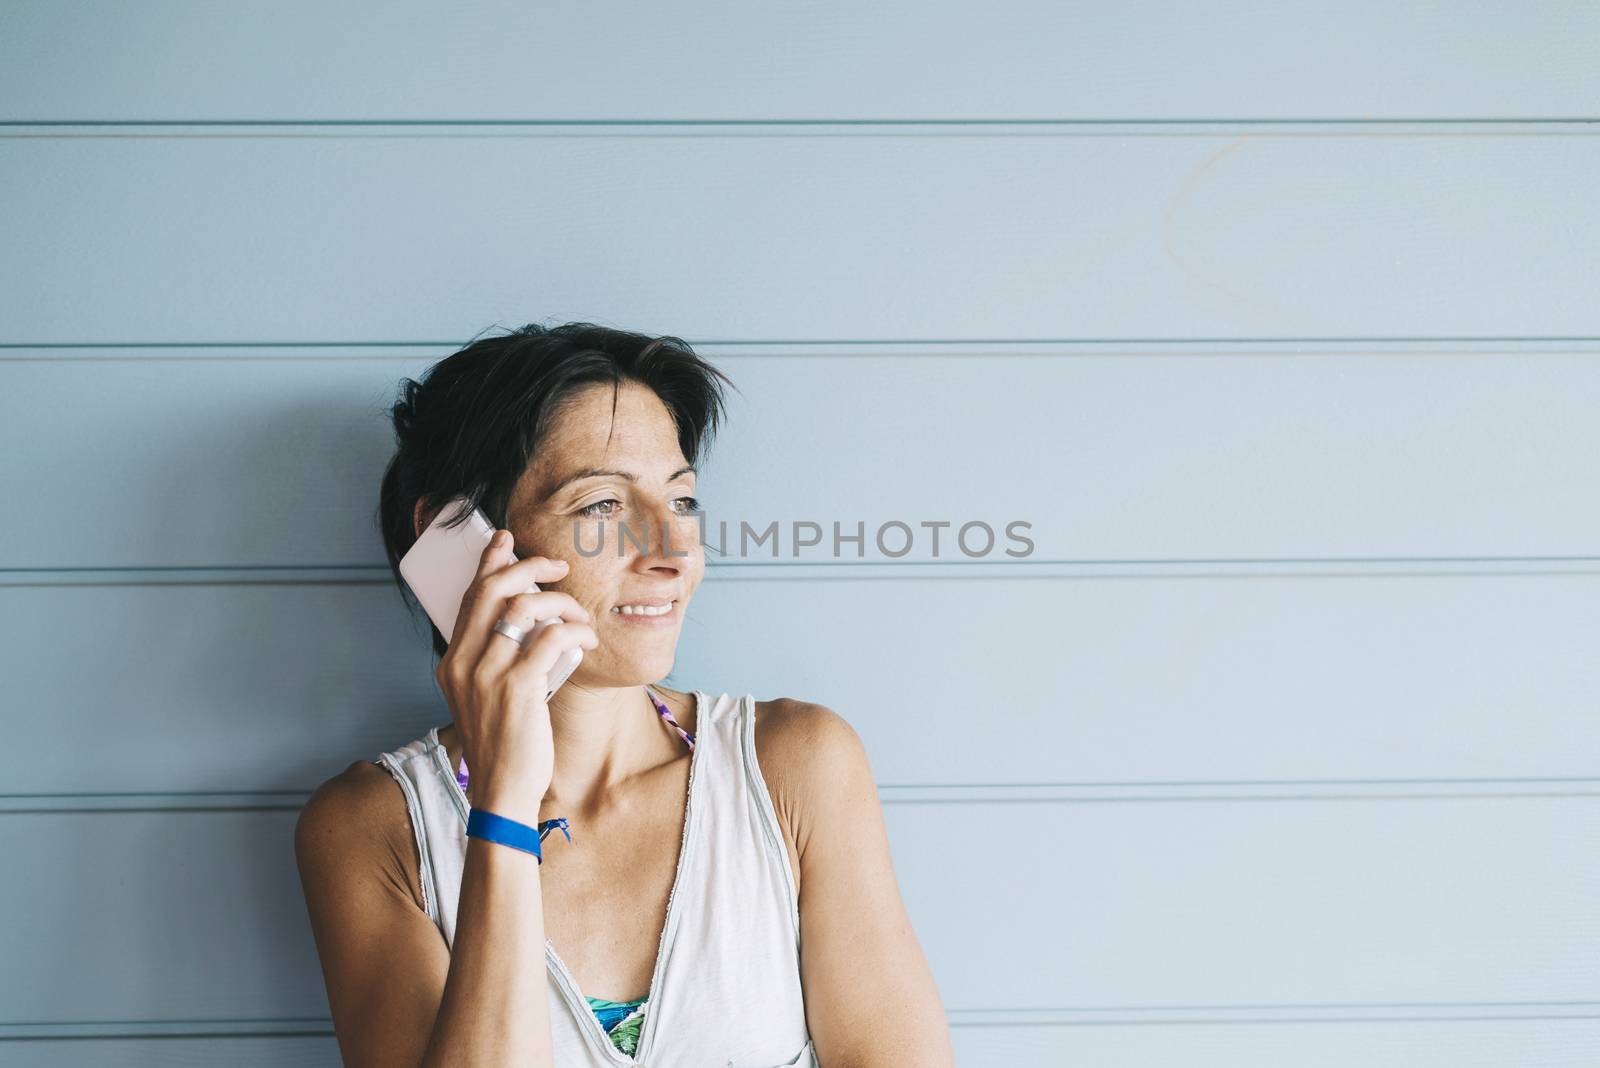 Young adult female in summer dress talking on cell phone while leaning against wood paneled wall by raferto1973